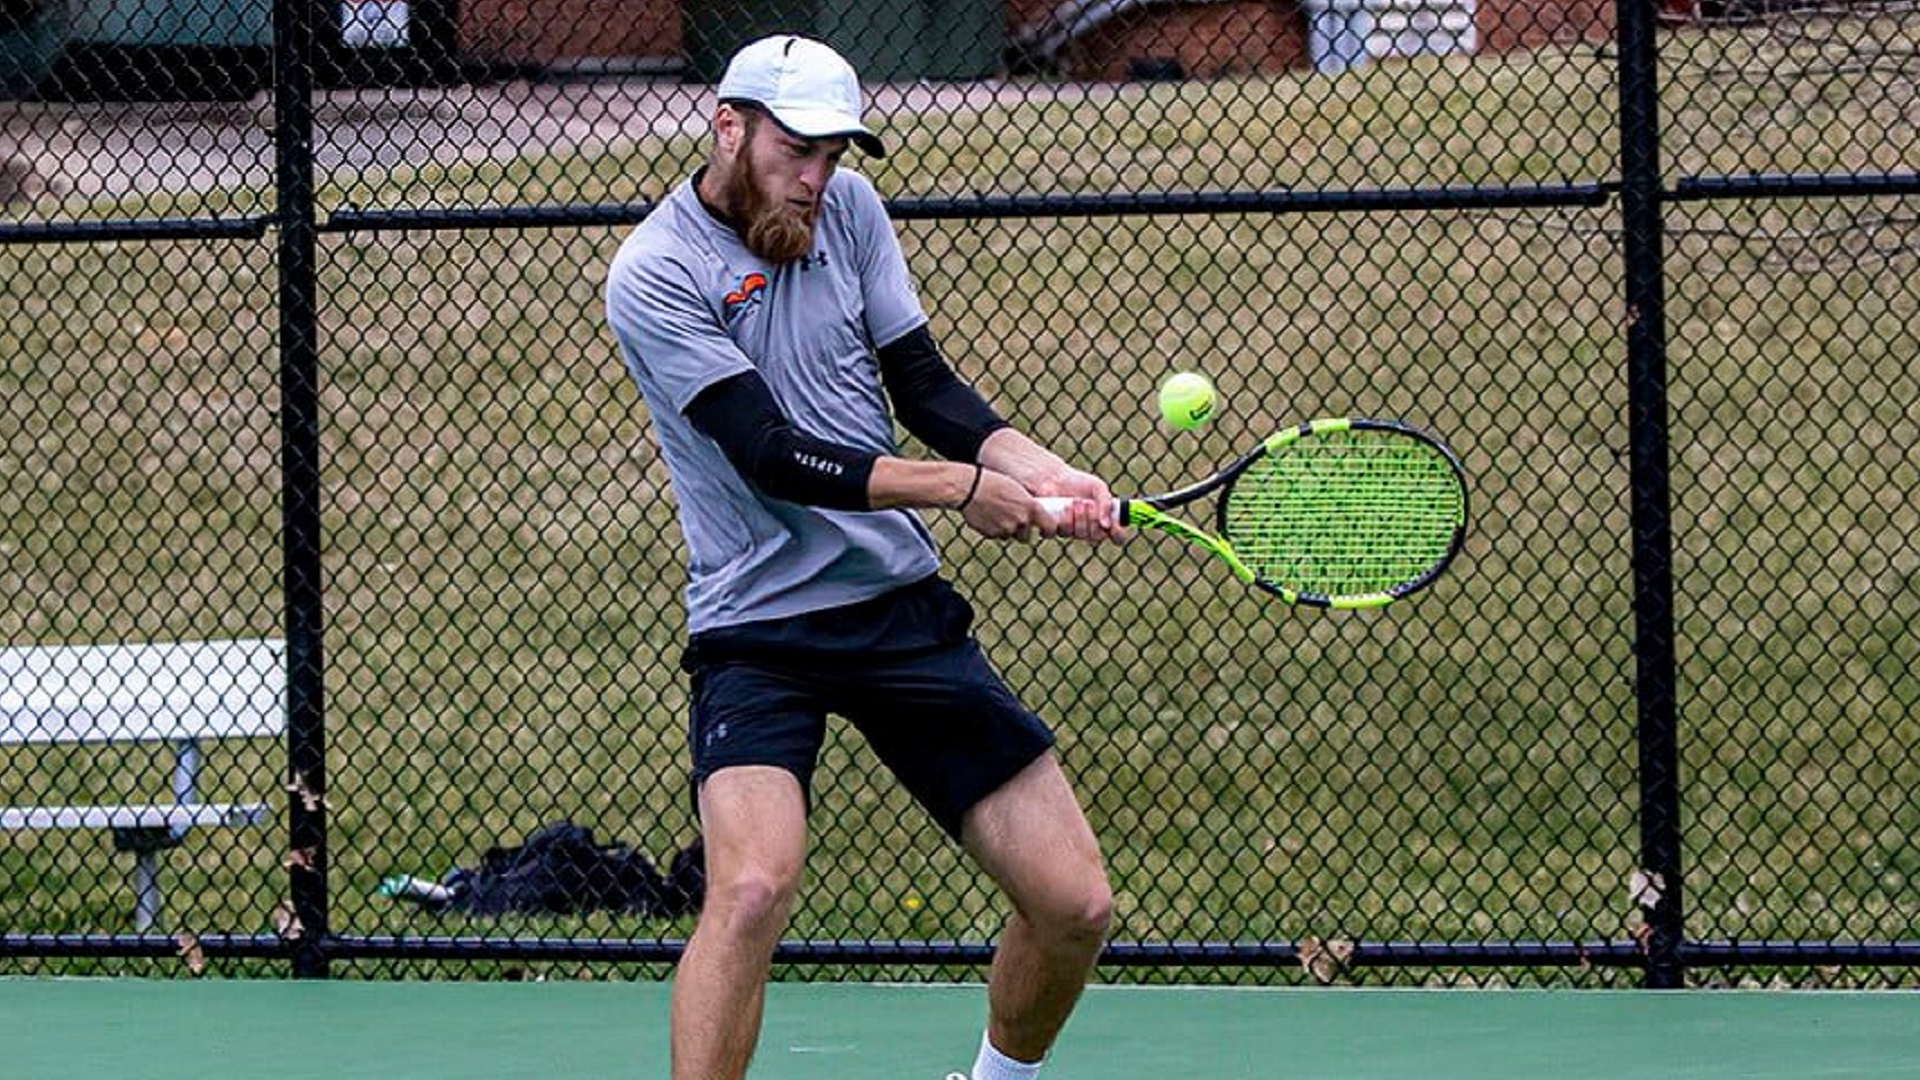 Frank Bonacia earned a three-set win in singles for the Pioneers against North Georgia (photo by Chuck Williams)